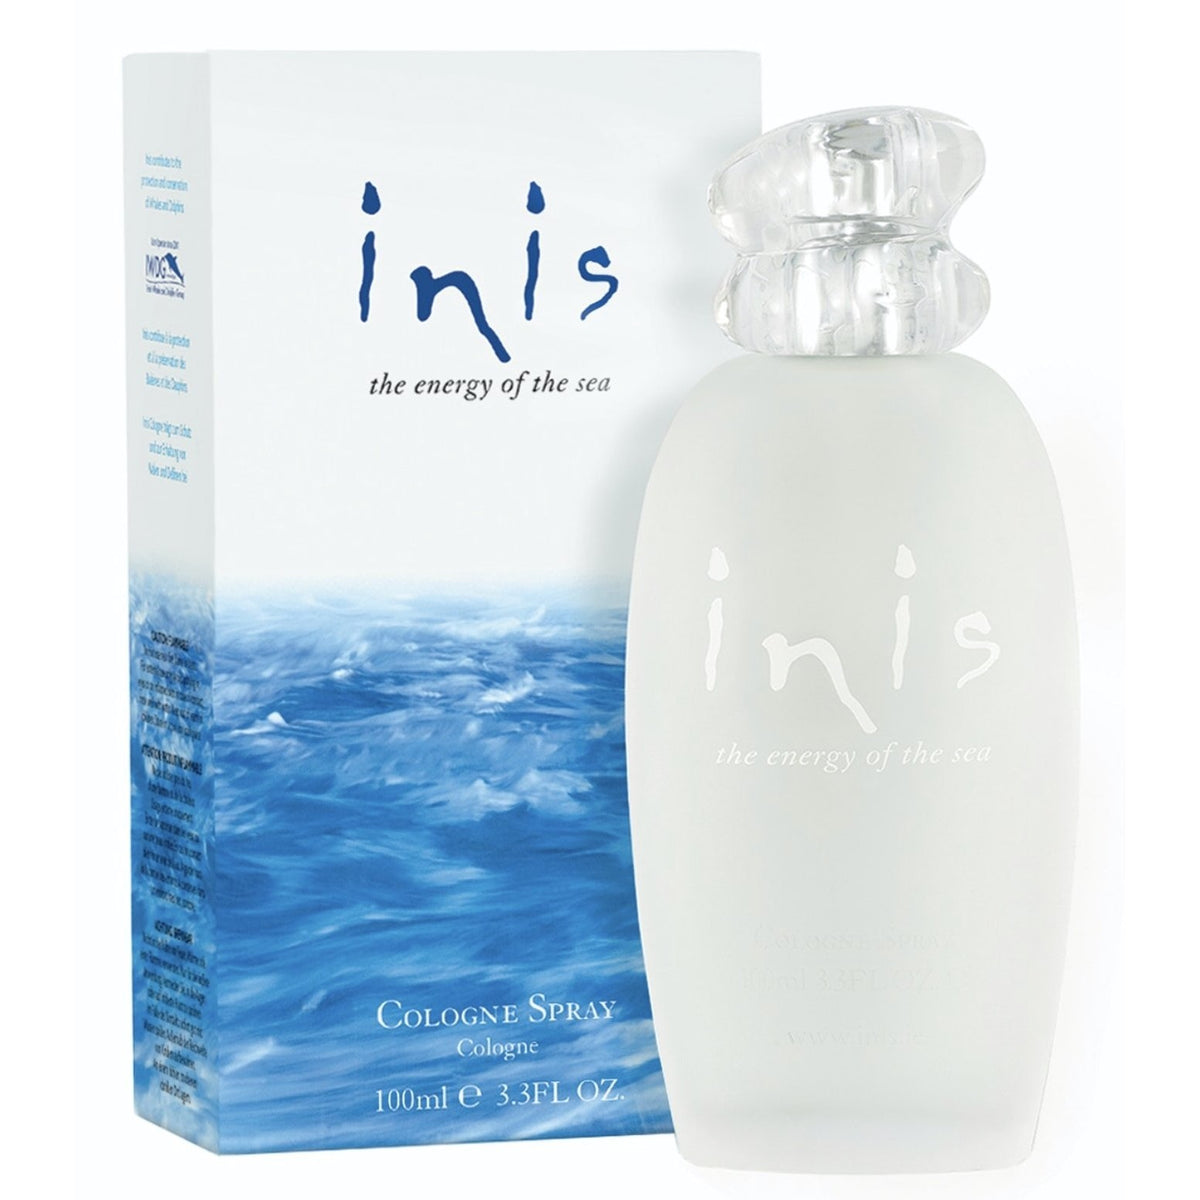 Inis the Energy of the Sea Cologne Spray - 3.3 fl oz